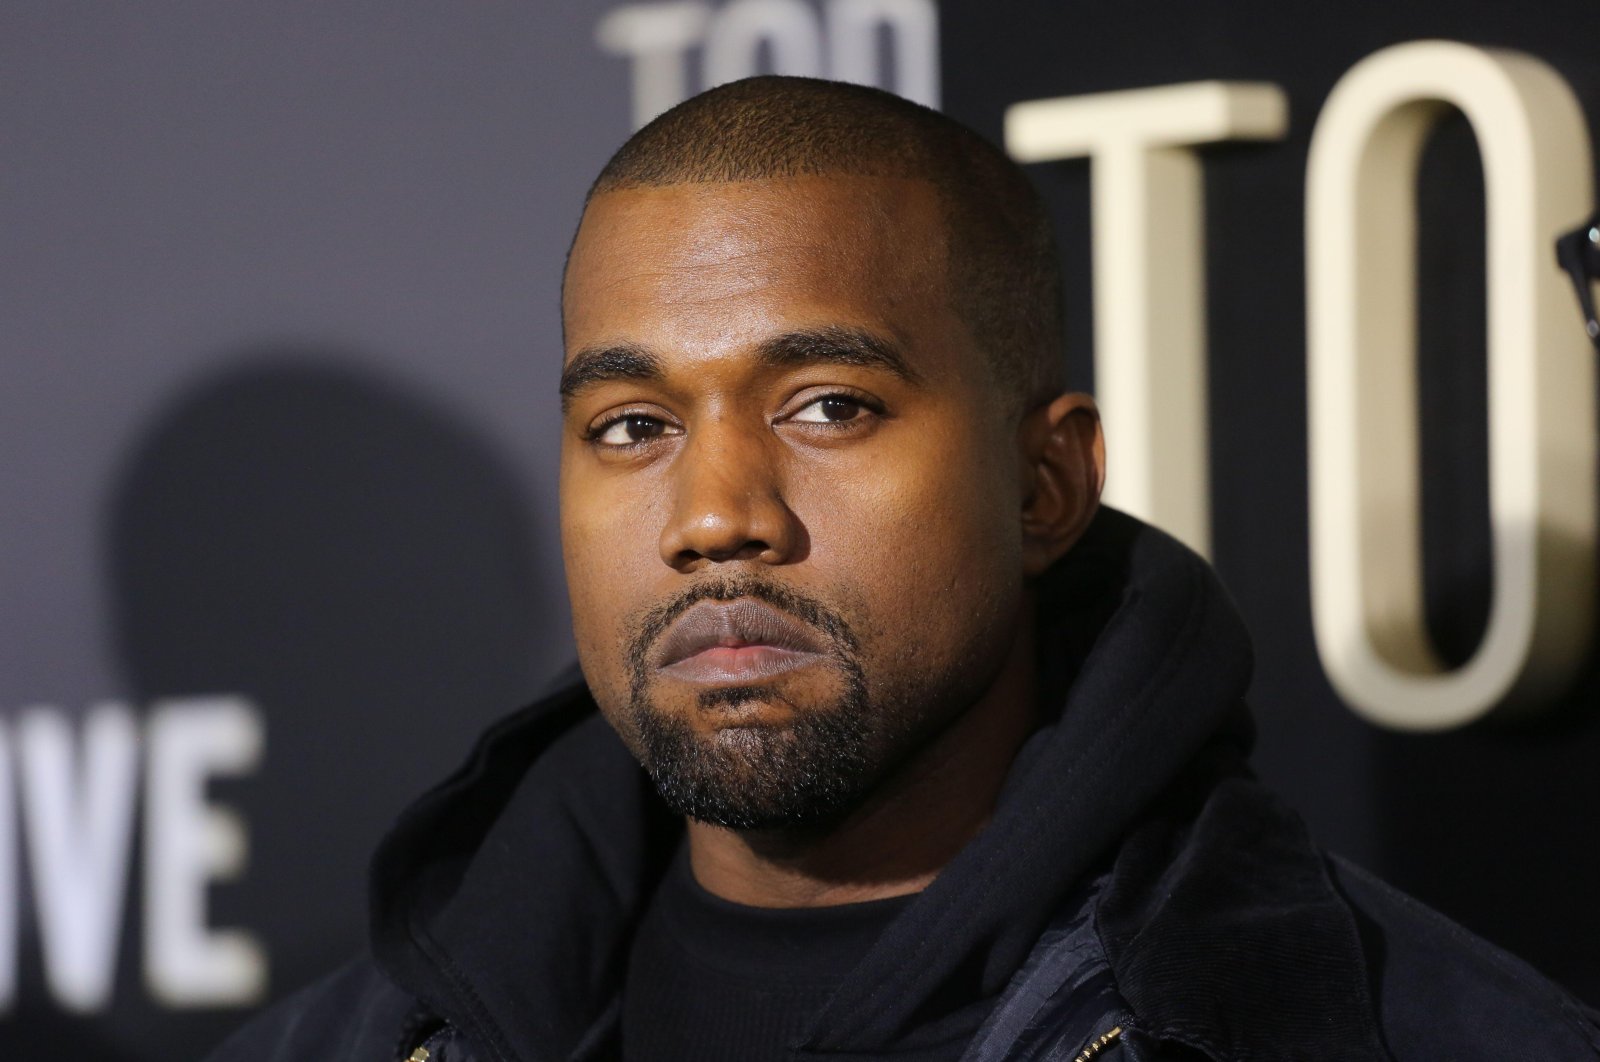 Kanye West attends the Top Five New York Premiere at Ziegfeld Theater, New York, U.S., Dec. 3, 2014. (Alamy via Reuters)